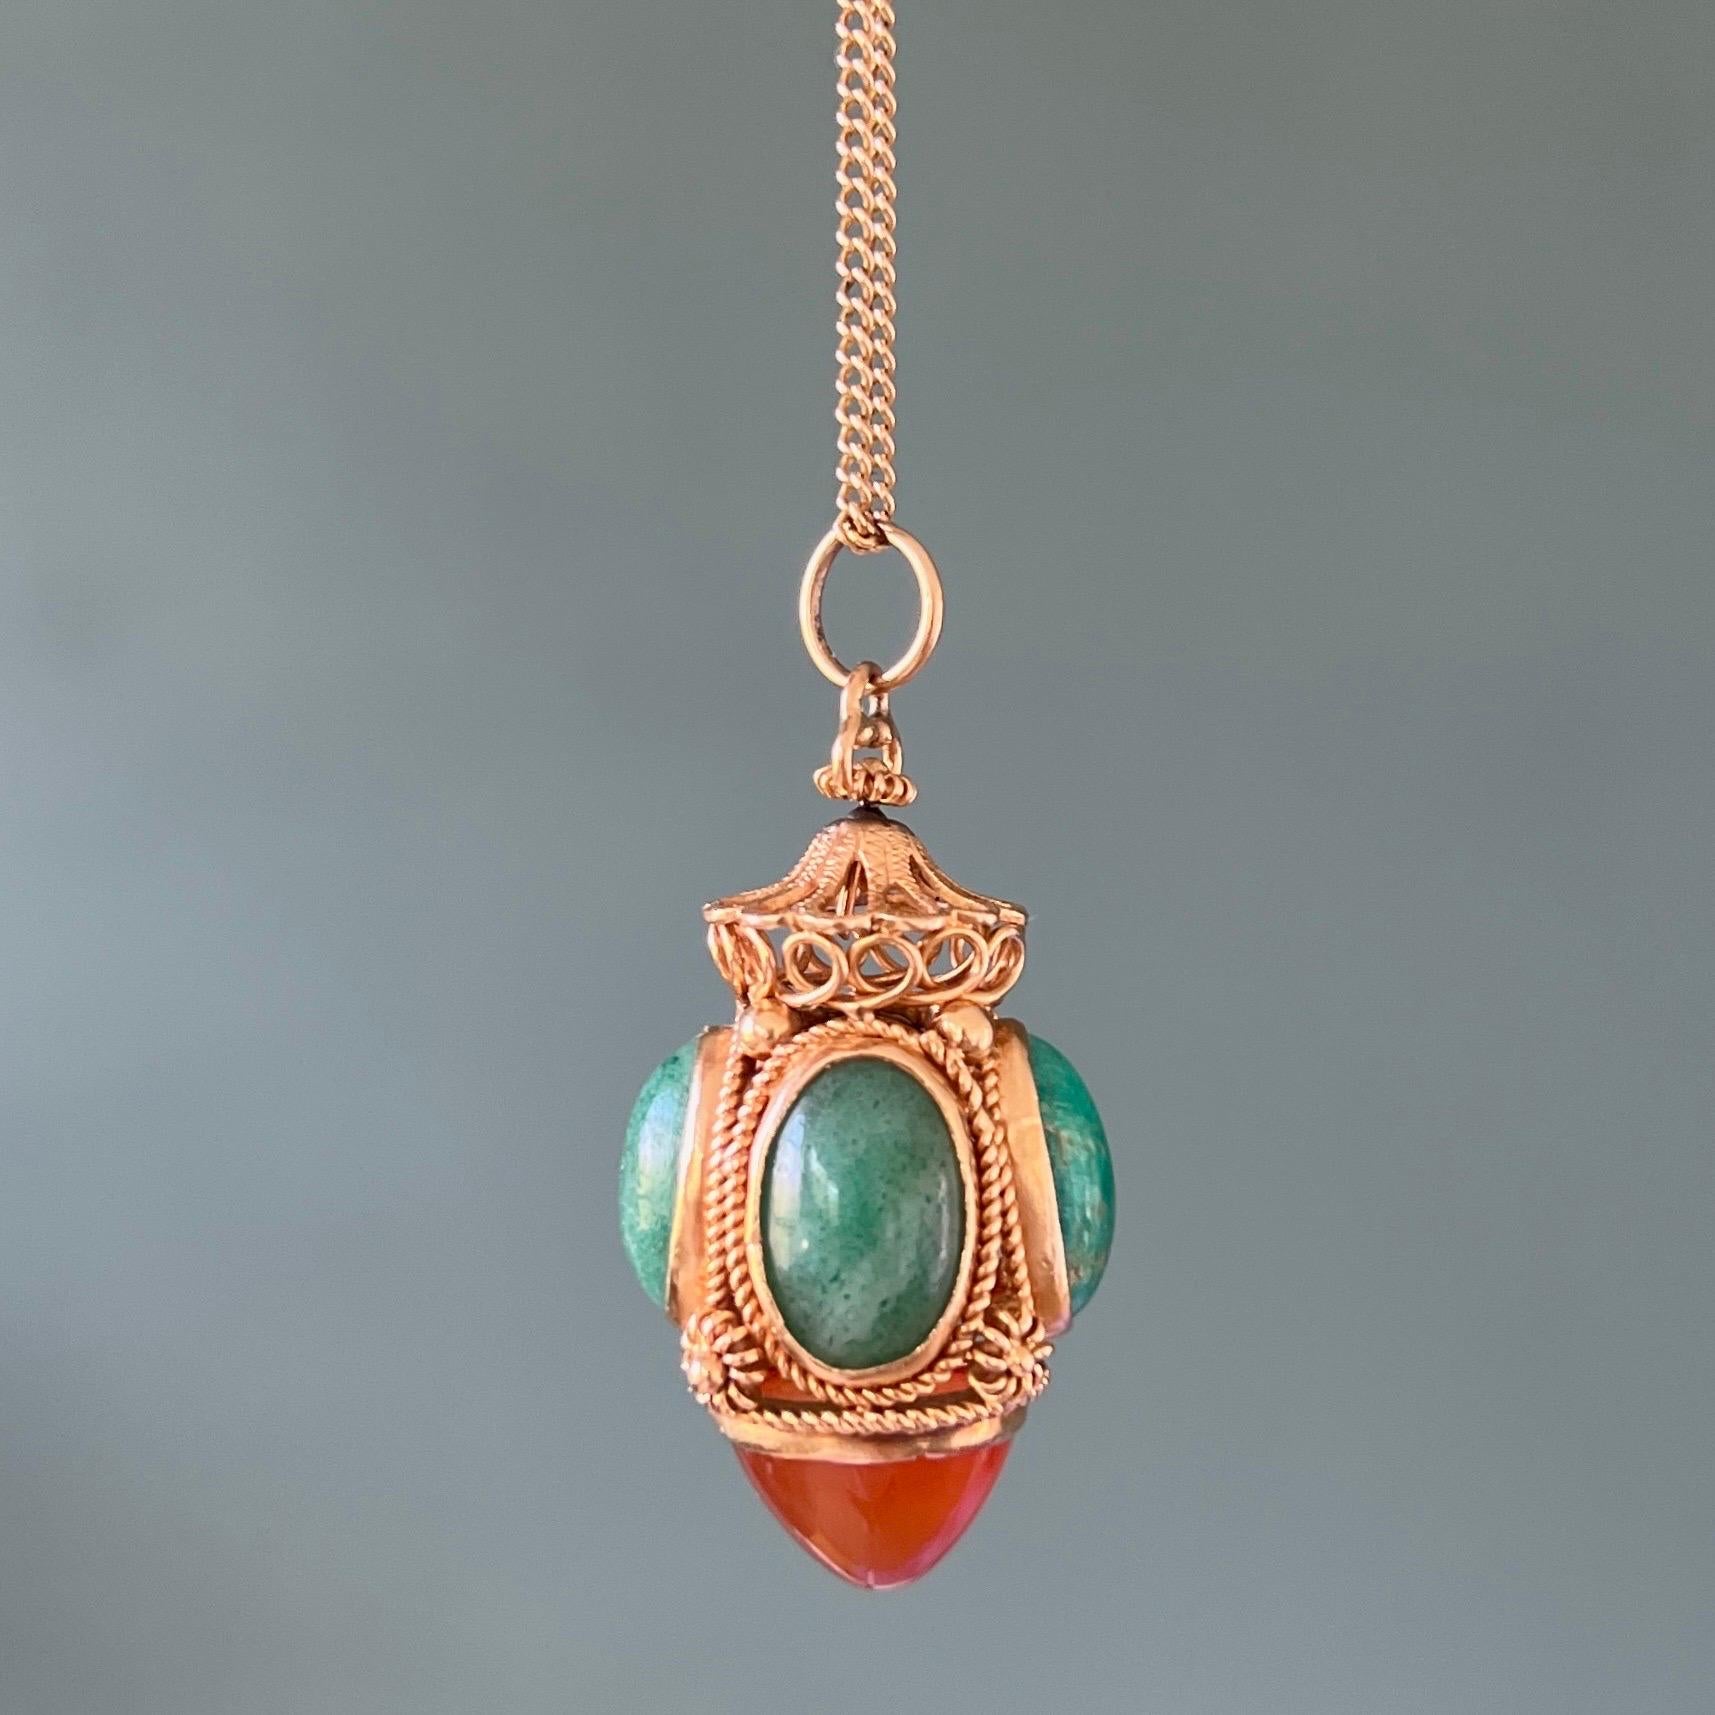 Beautiful large 18 karat gold Venetian Revival style lantern pendant. The pendant is set with four colorful opaque cabochon cut oval green amazonite gemstones and a large cone shaped translucent carnelian gemstone at the bottom. The gold surface is